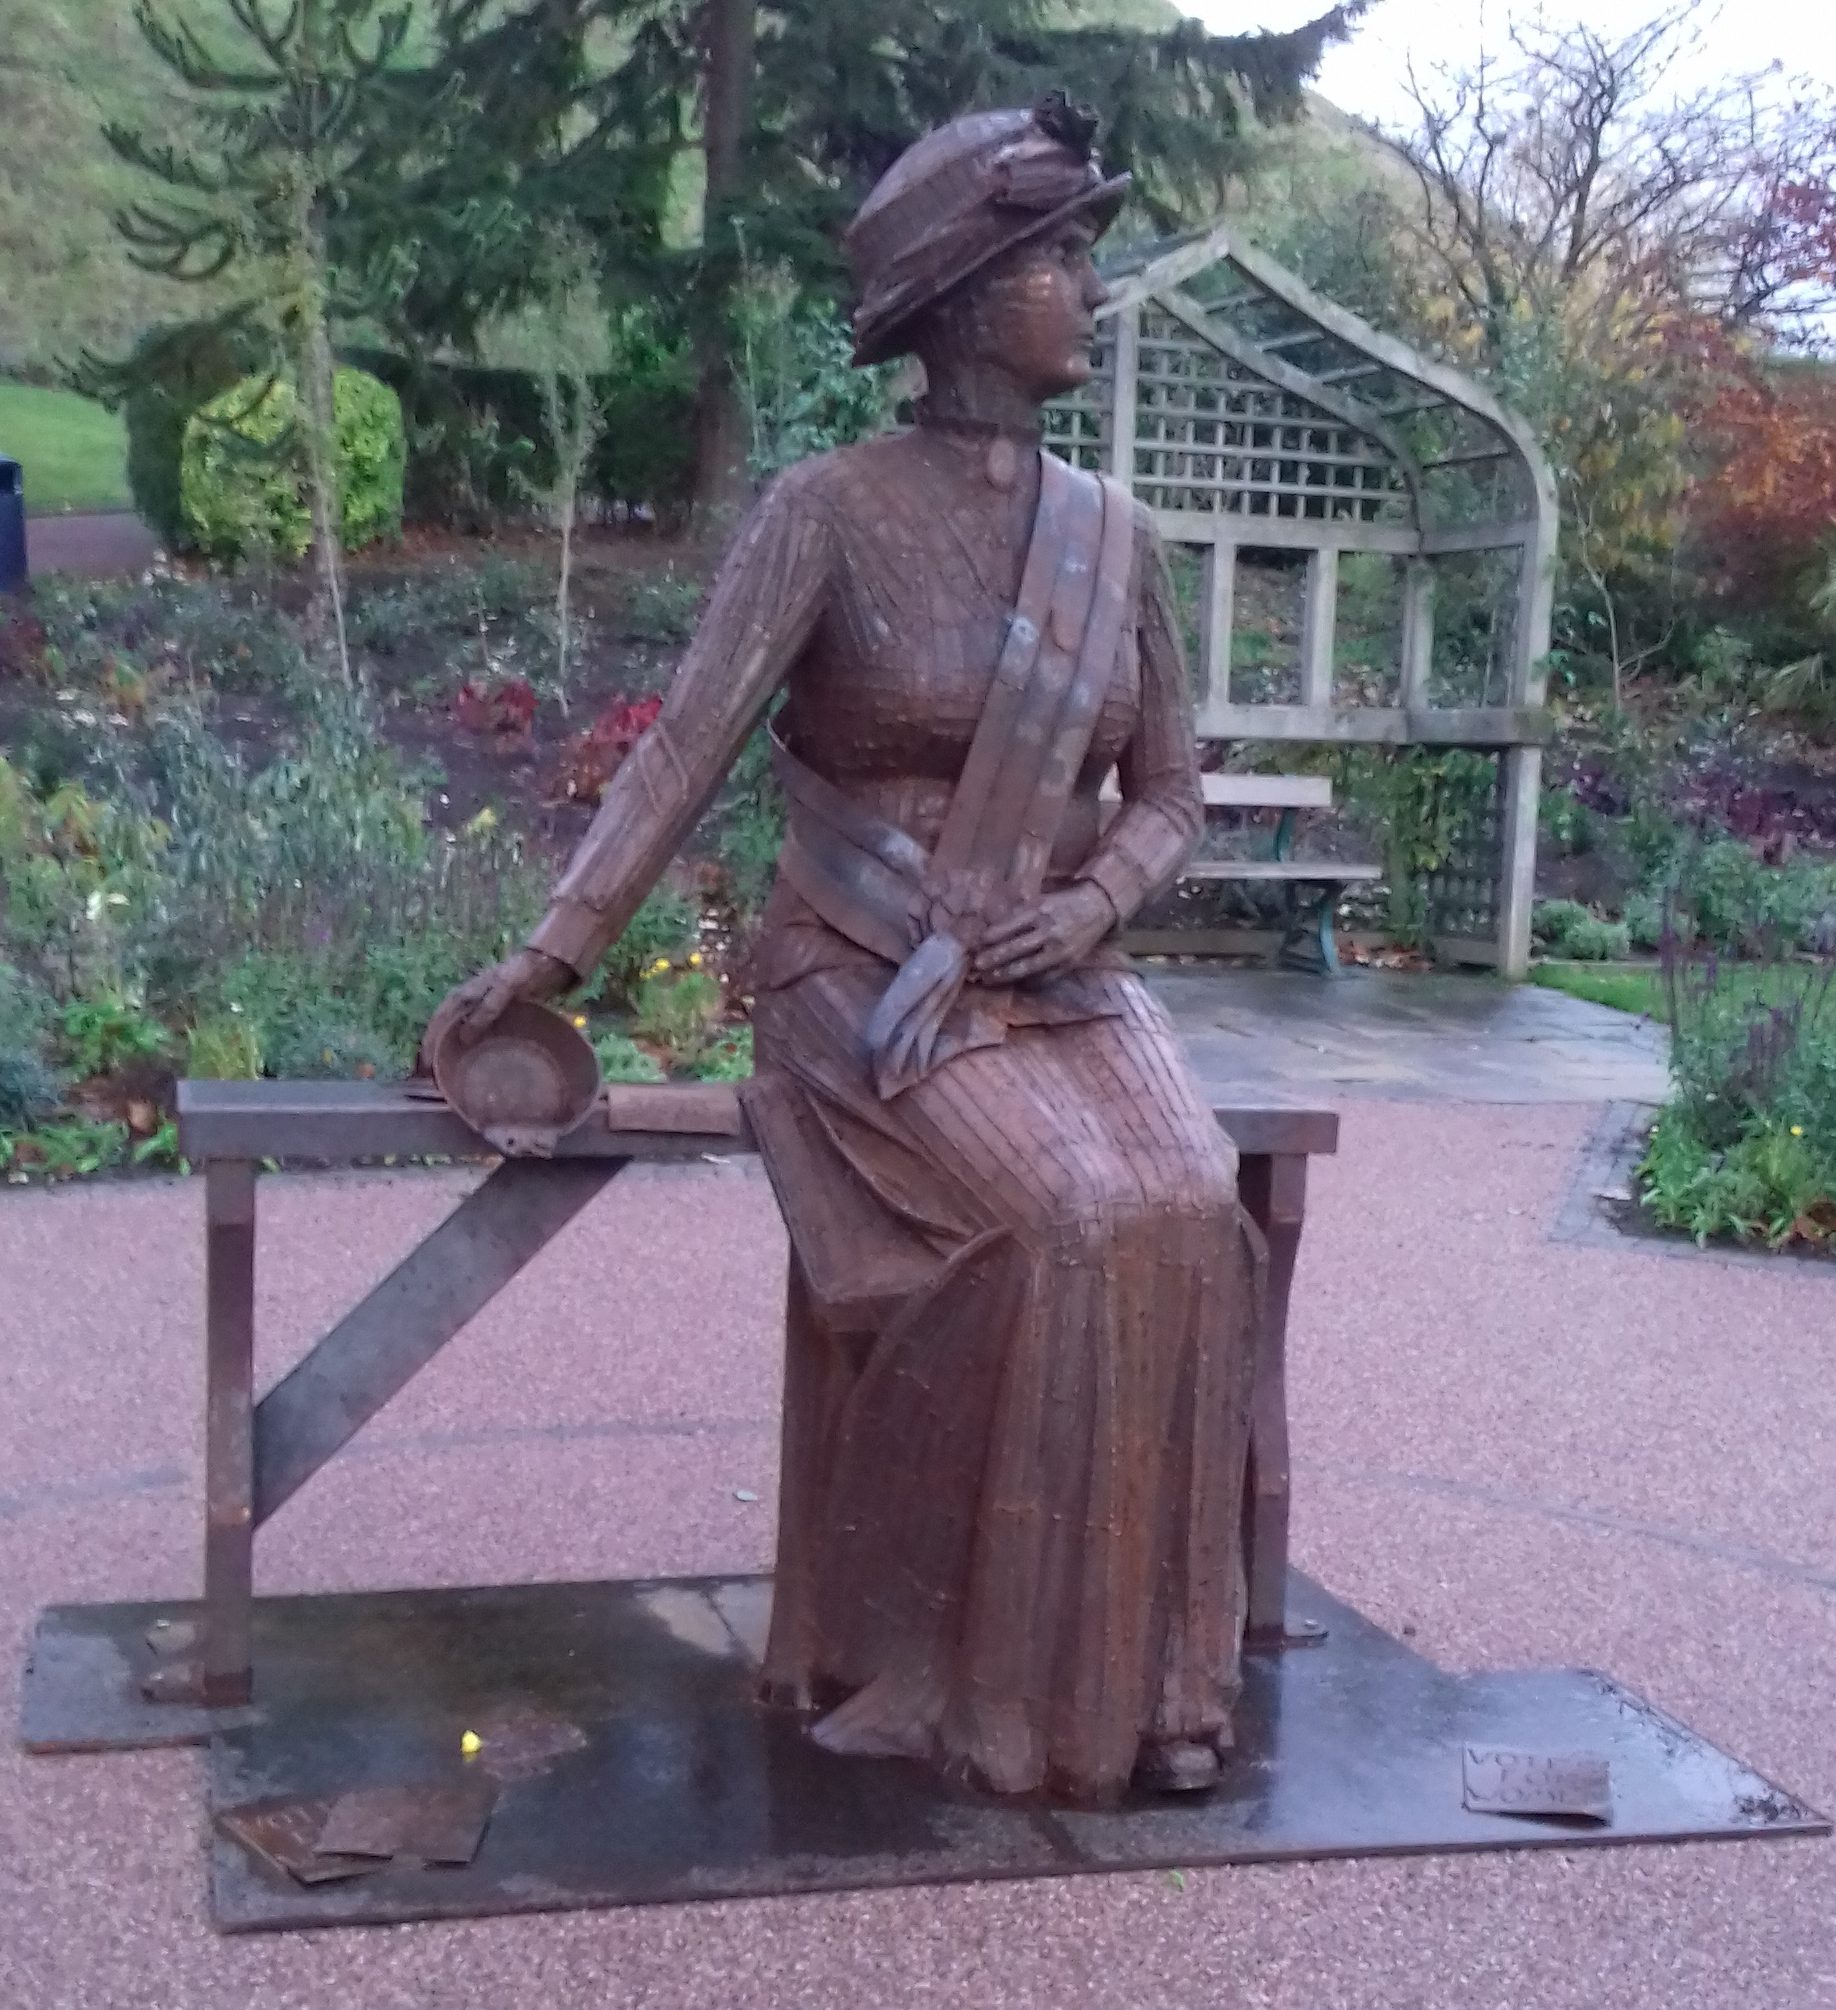 photograph of a brown metal statue in a park, a figure of a Edwardian woman in a dress seate